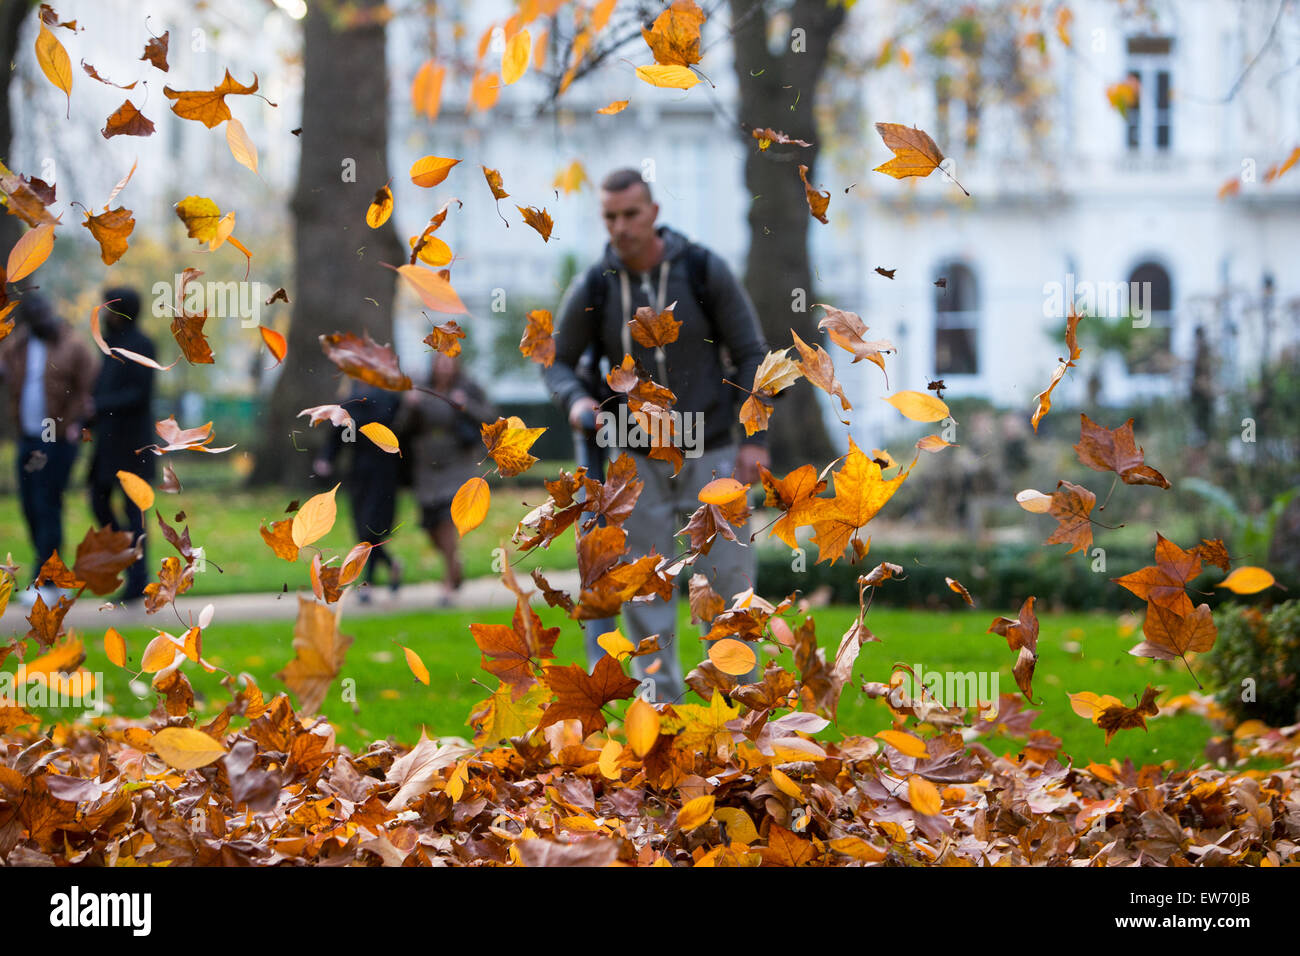 People walking in a London square, viewed through falling autumn leaves Stock Photo